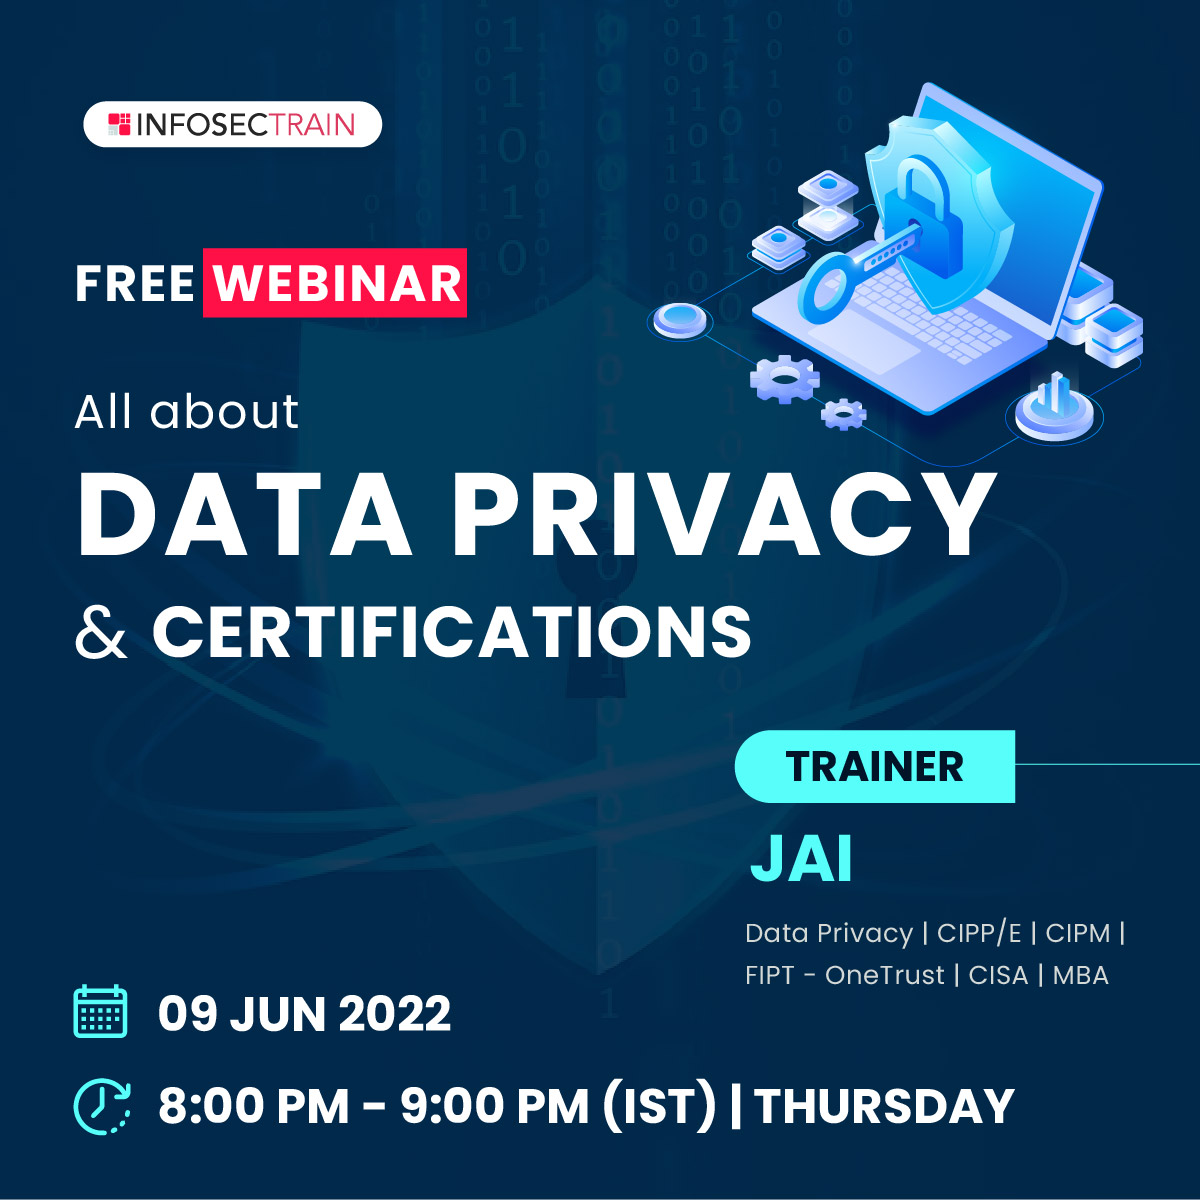 Free Webinar on All about Data Privacy & Certifications, Online Event